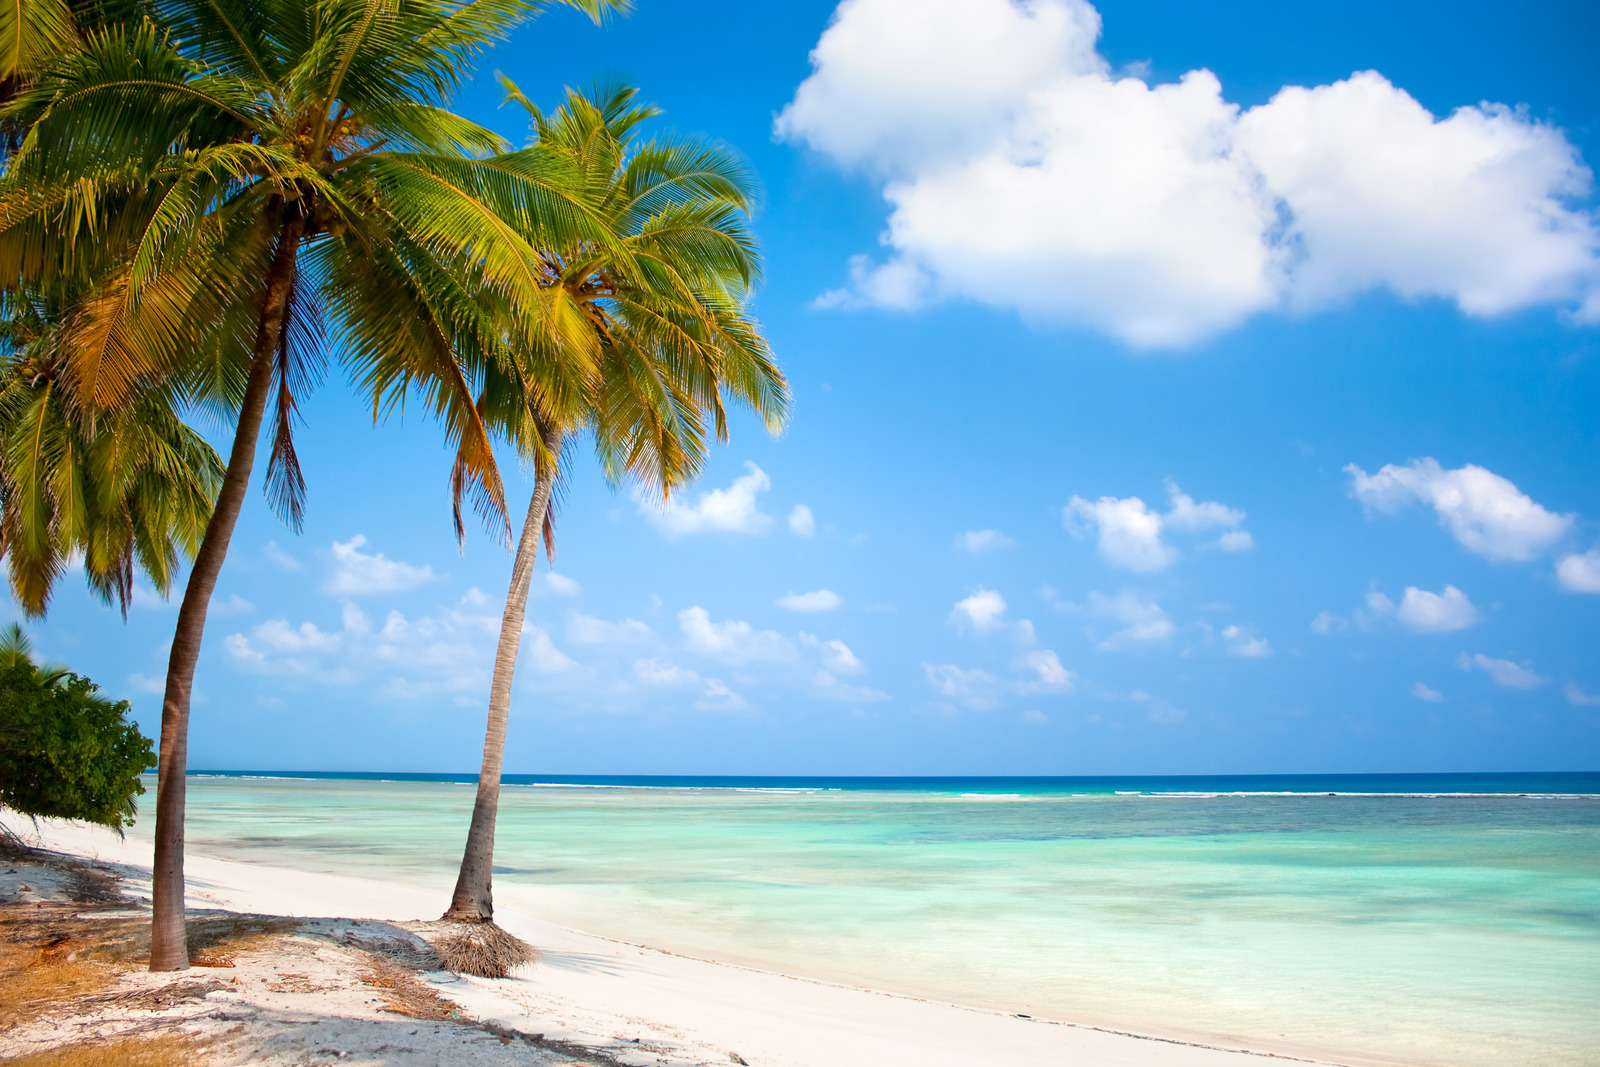 Island Paradise - Palm trees hanging over a sandy white beach with stunning turquoise waters and white clouds against blue sky